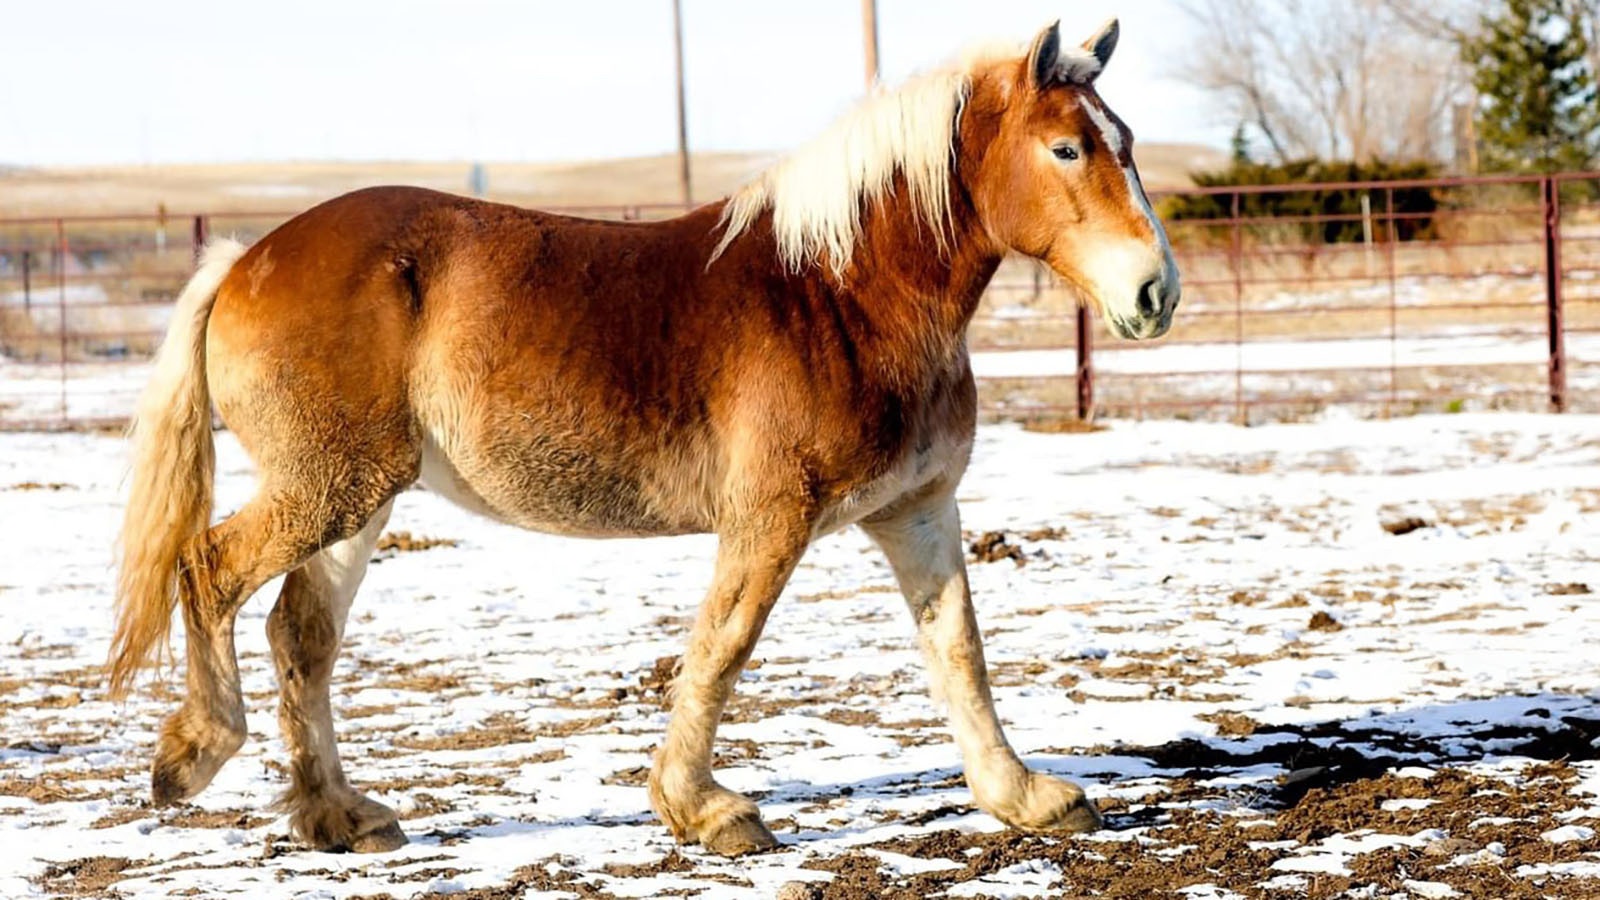 Emilee is a 16-year-old Belgian draft horse mare available for adoption though the Broken Bandit Wildlife Center near Cheyenne.